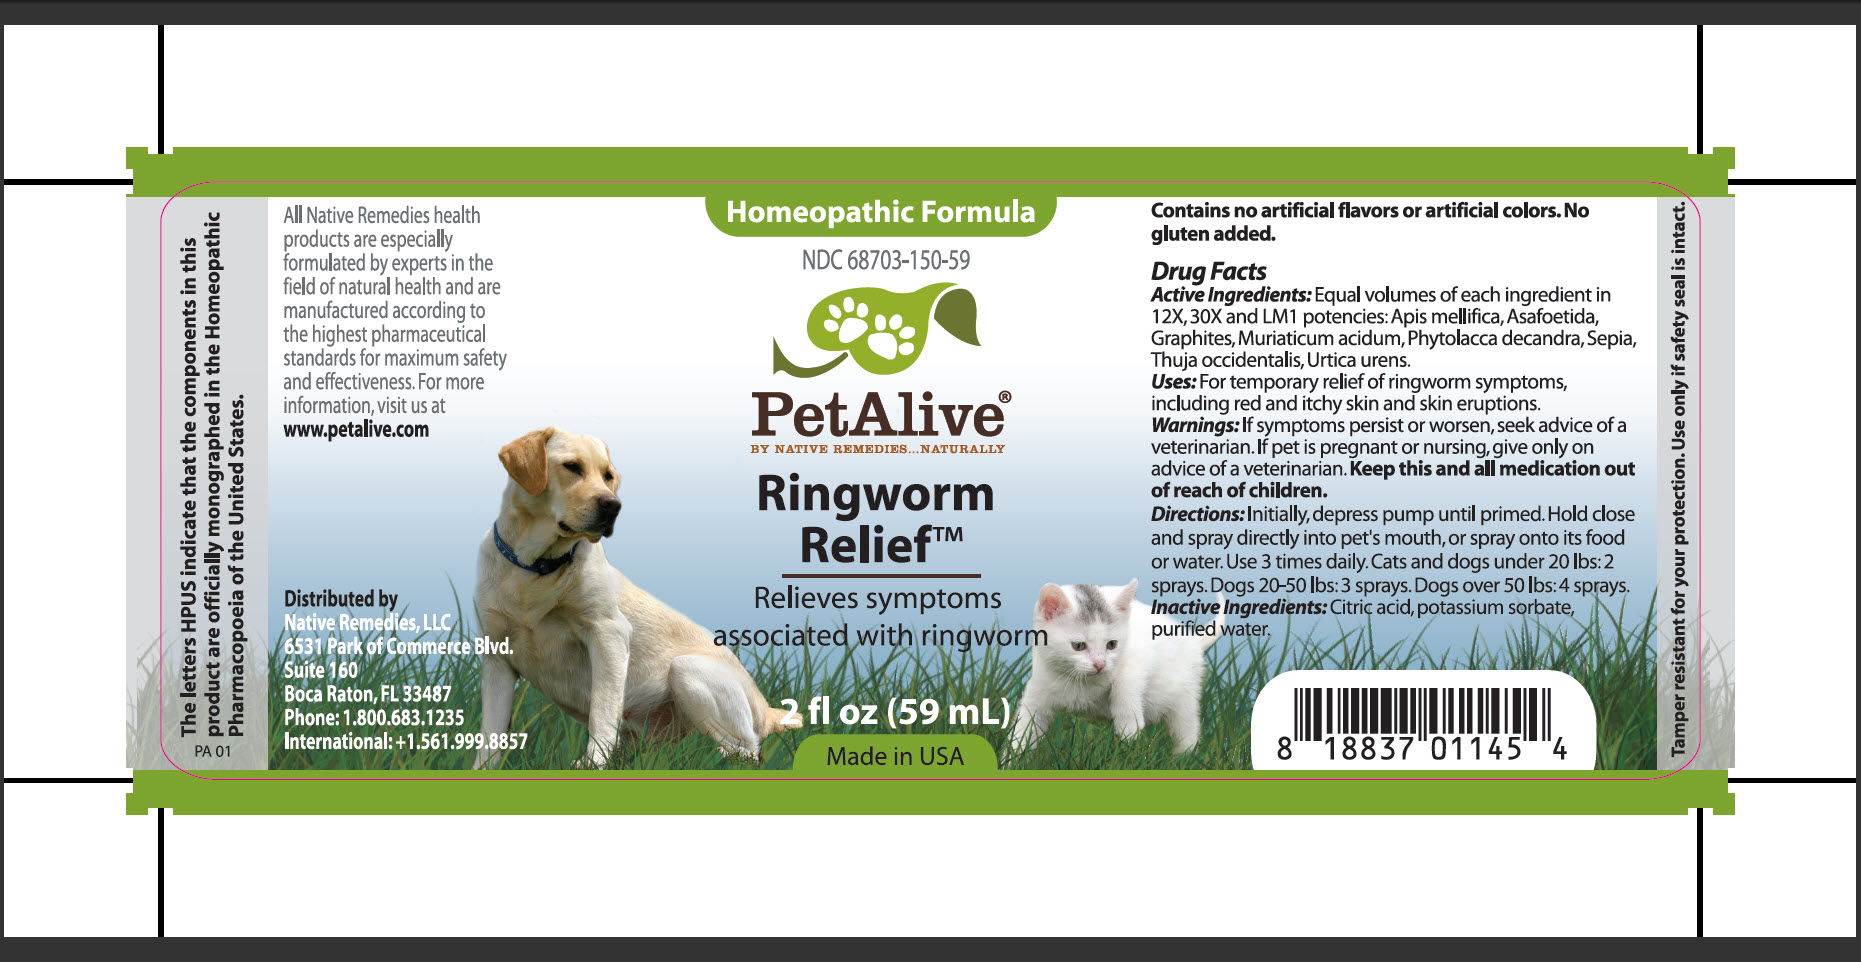 homeopathic treatment for Ringworm in homeopathy, Ringworm